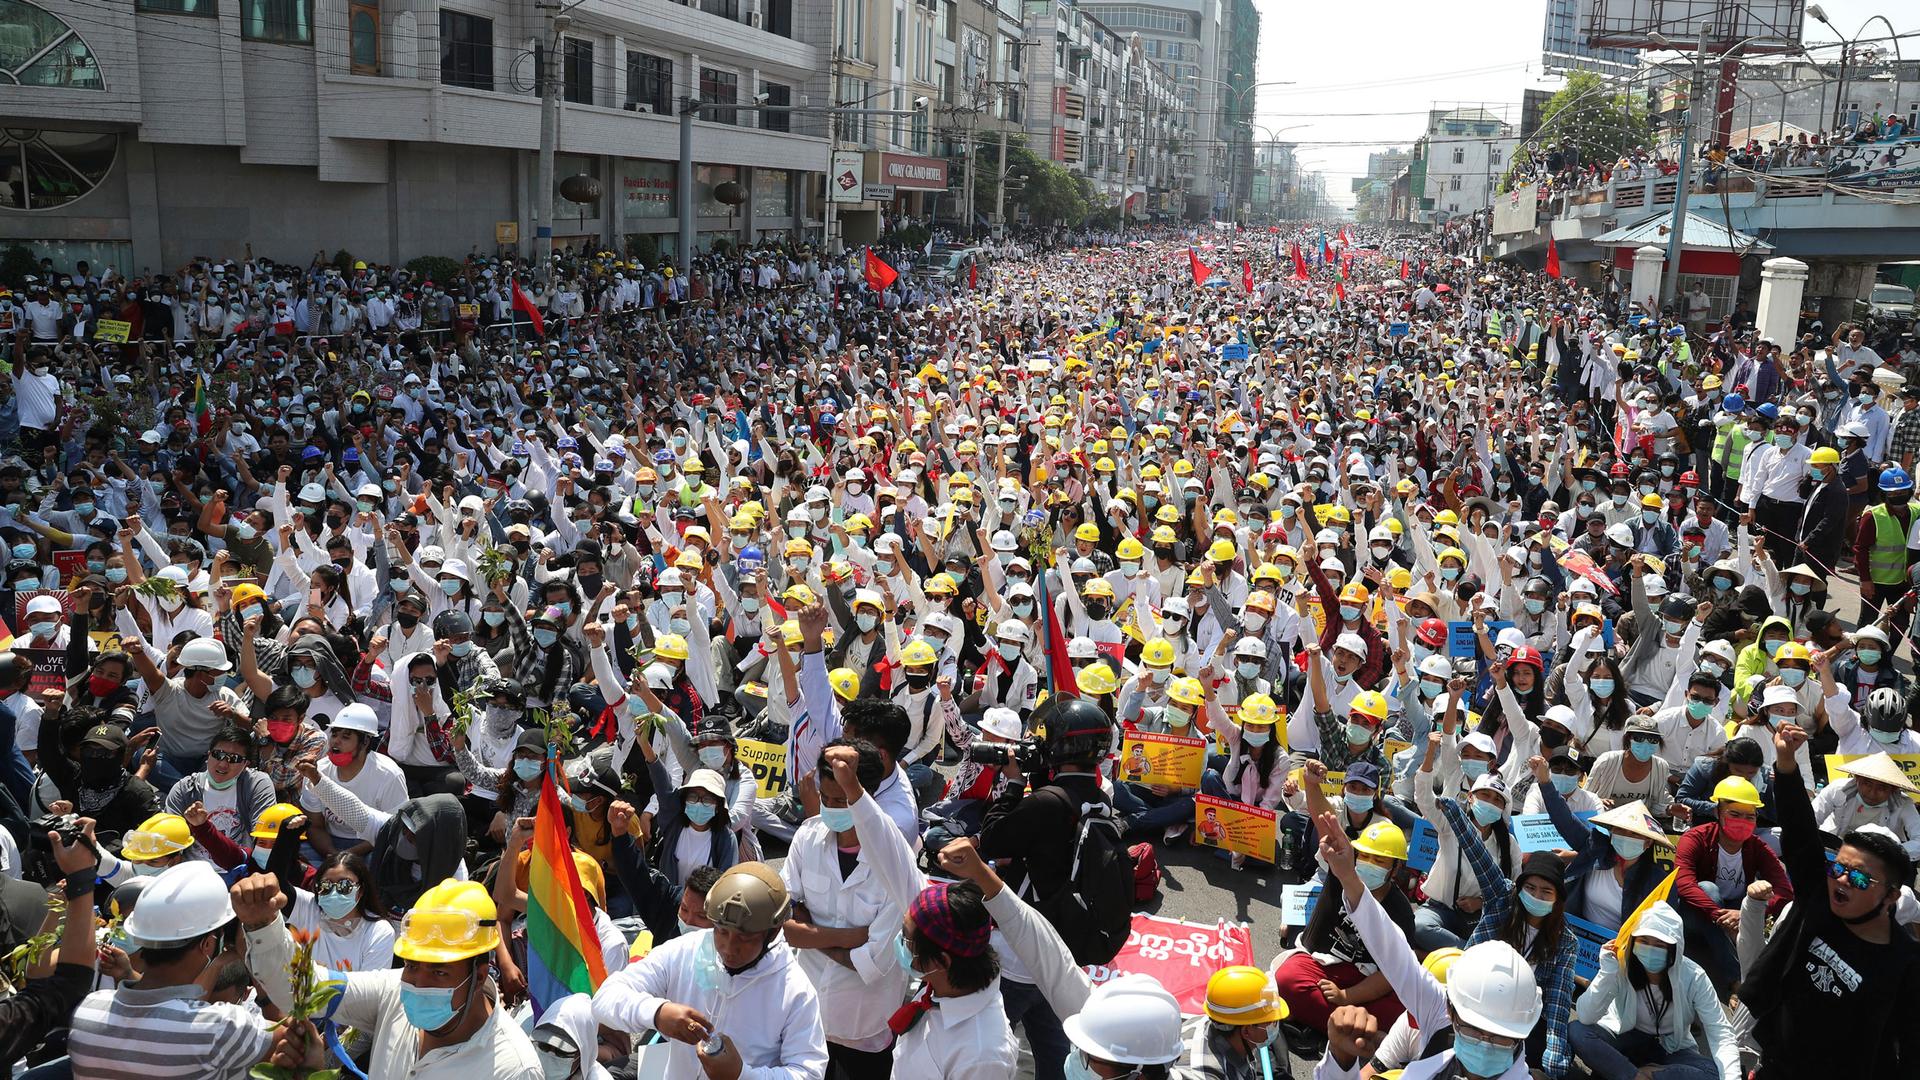 Thousands of people are shown marching in a street with many wearing yellow construction helmets.